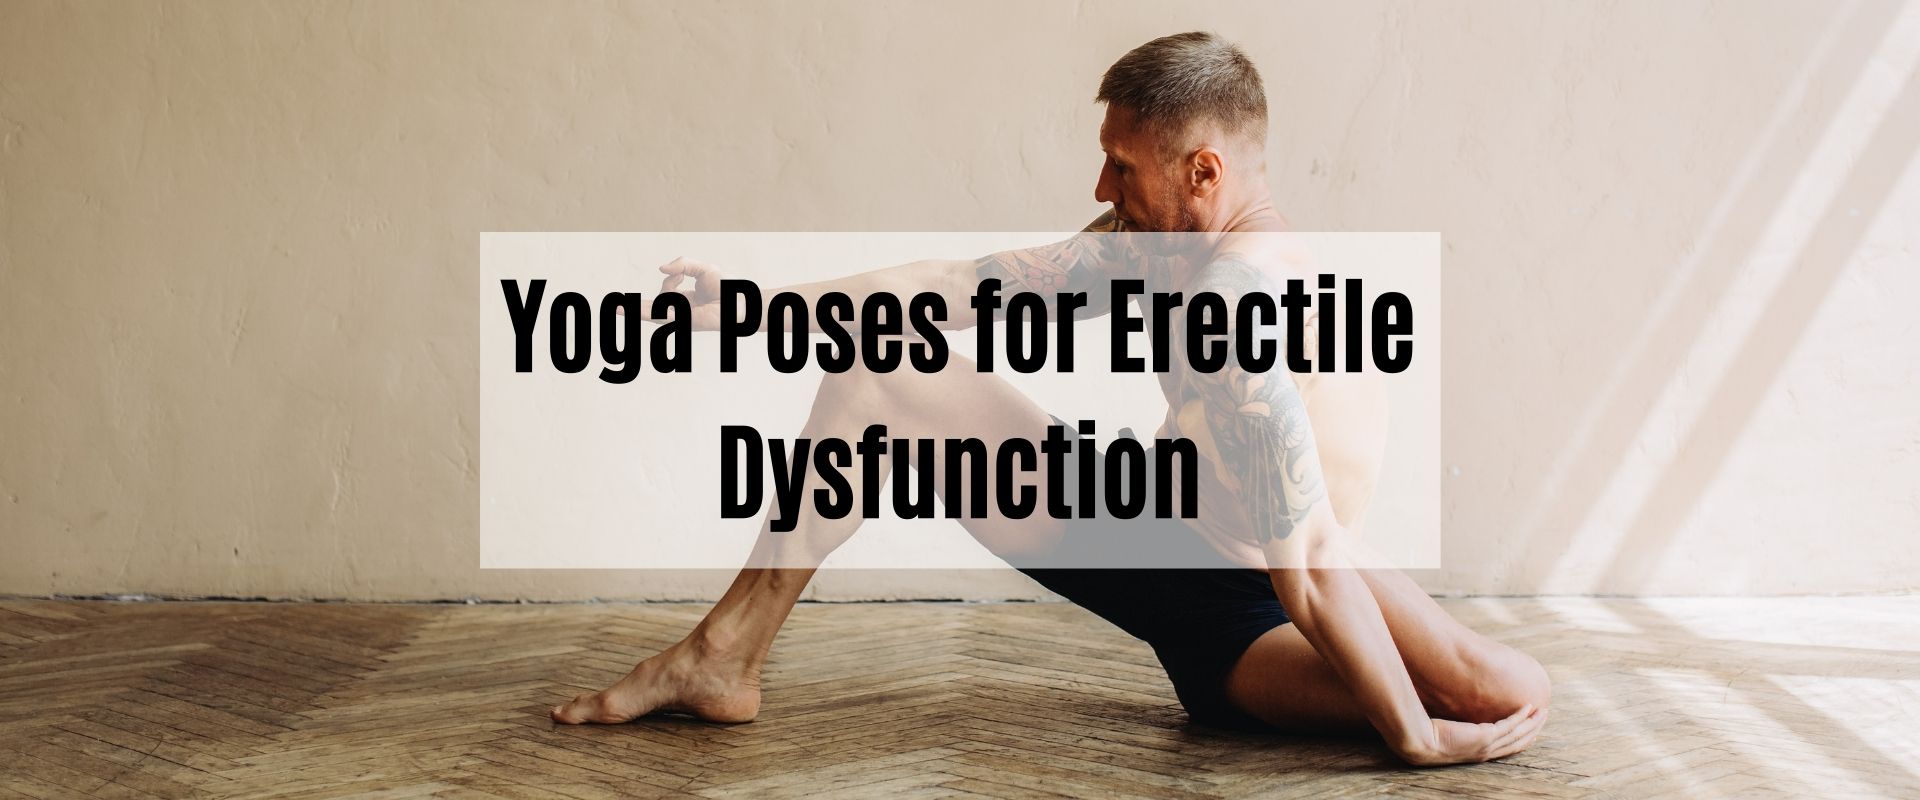 What are some yoga poses that will be better for my sexual health (for  men)? - Quora